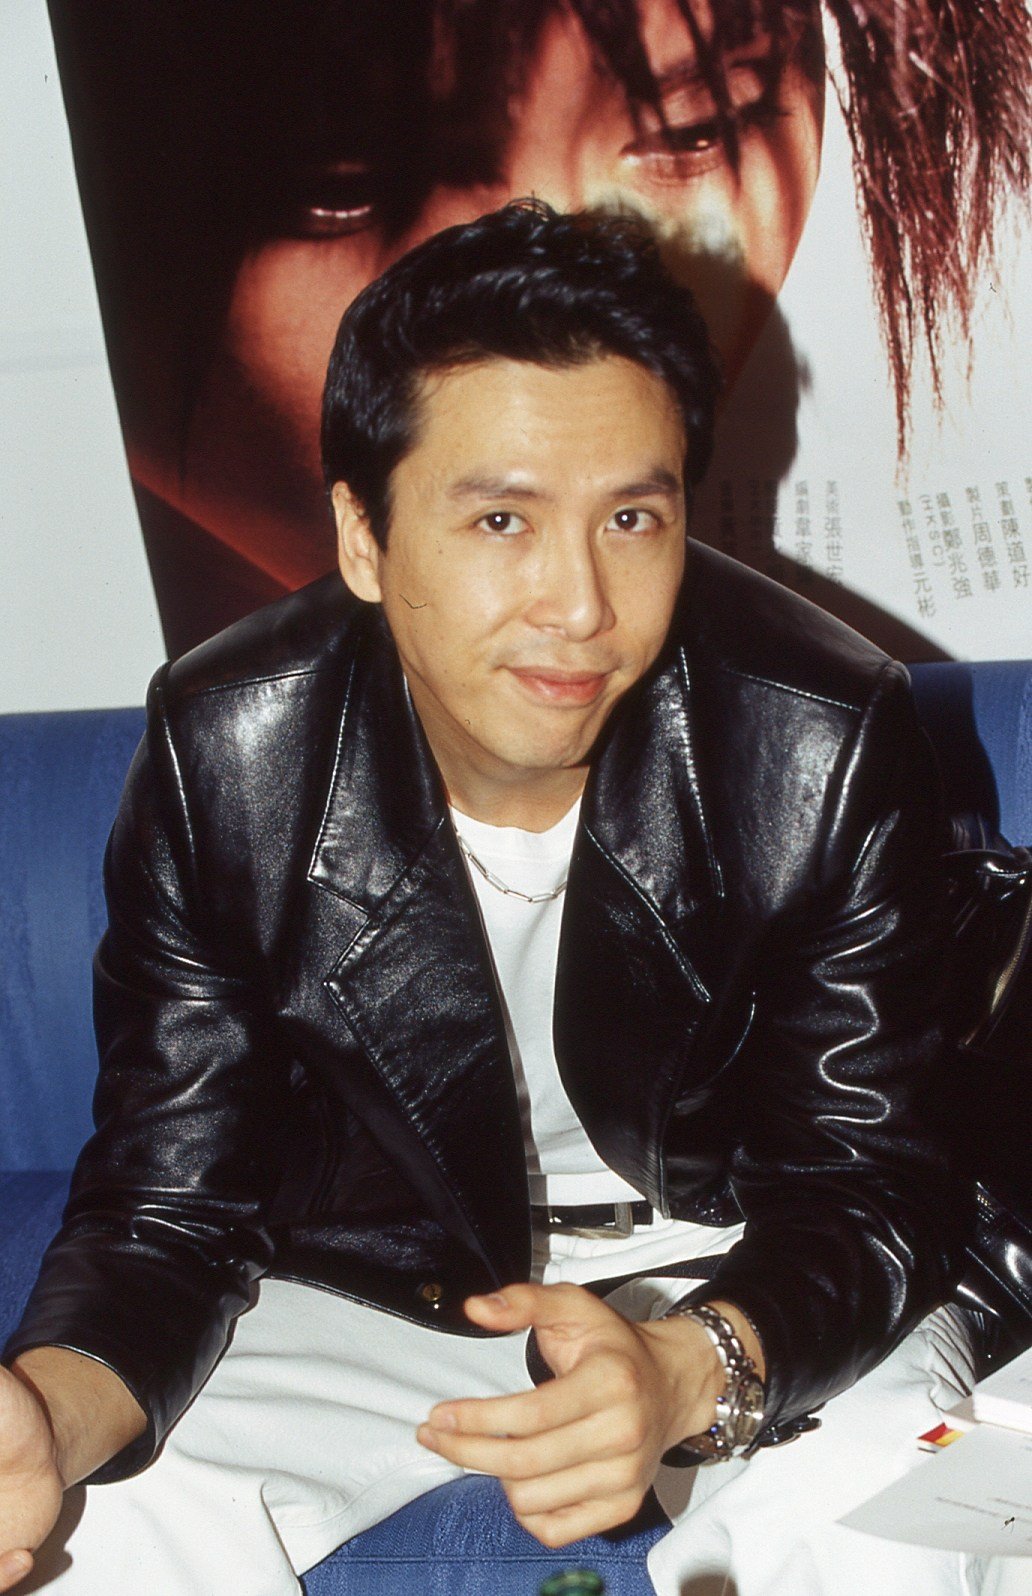 Donnie Yen at the Udine Far East Film Festival in 1999.